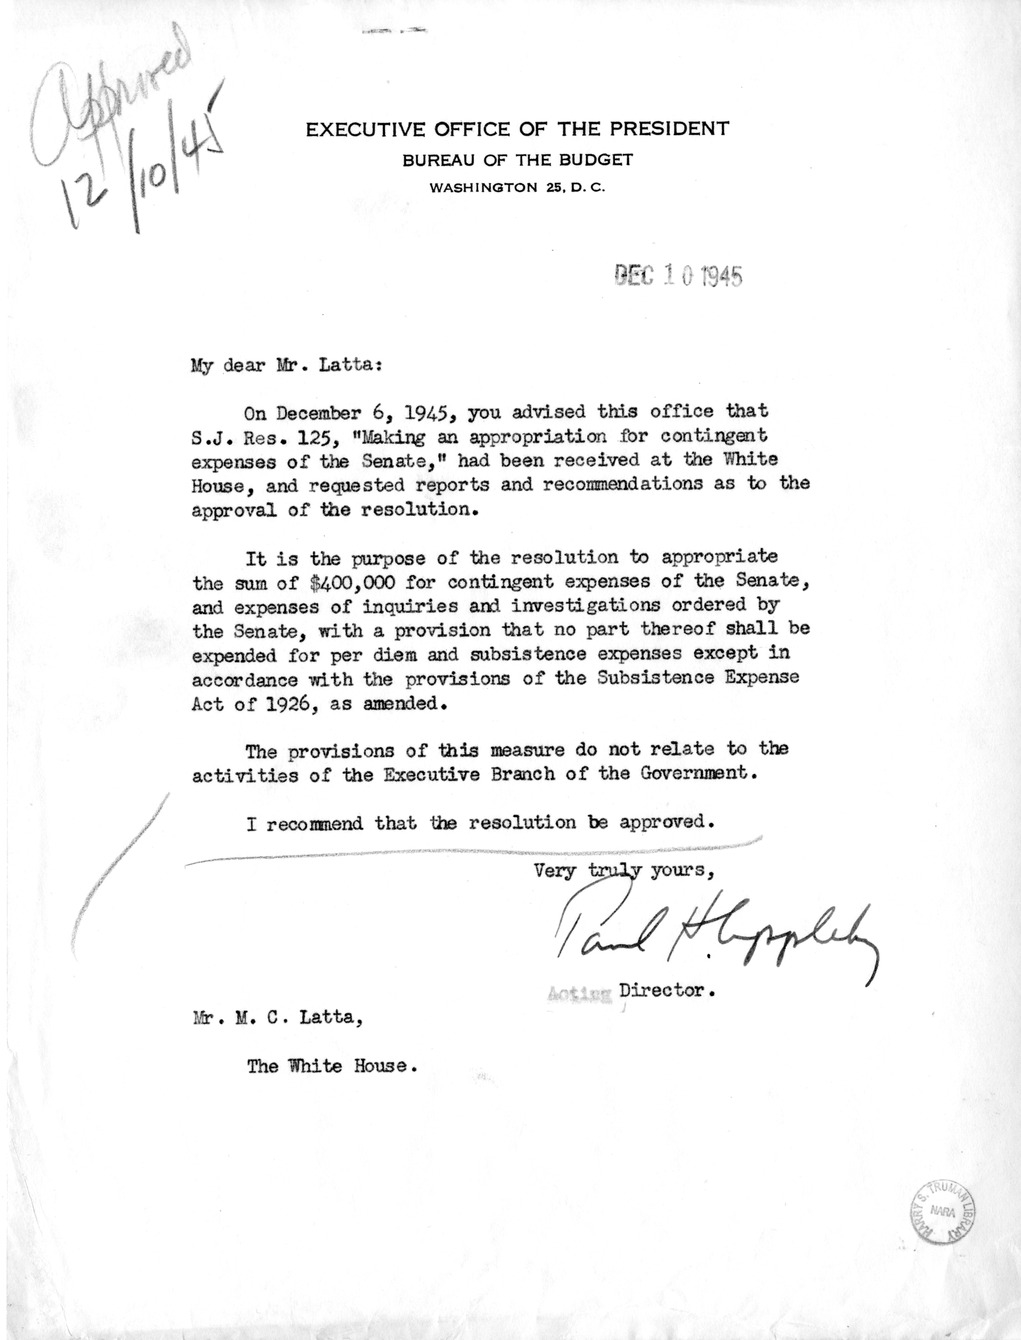 Memorandum from Paul H. Appleby to M. C. Latta, S.J. Res. 125, Making an Appropriation for Contingent Expenses of the Senate